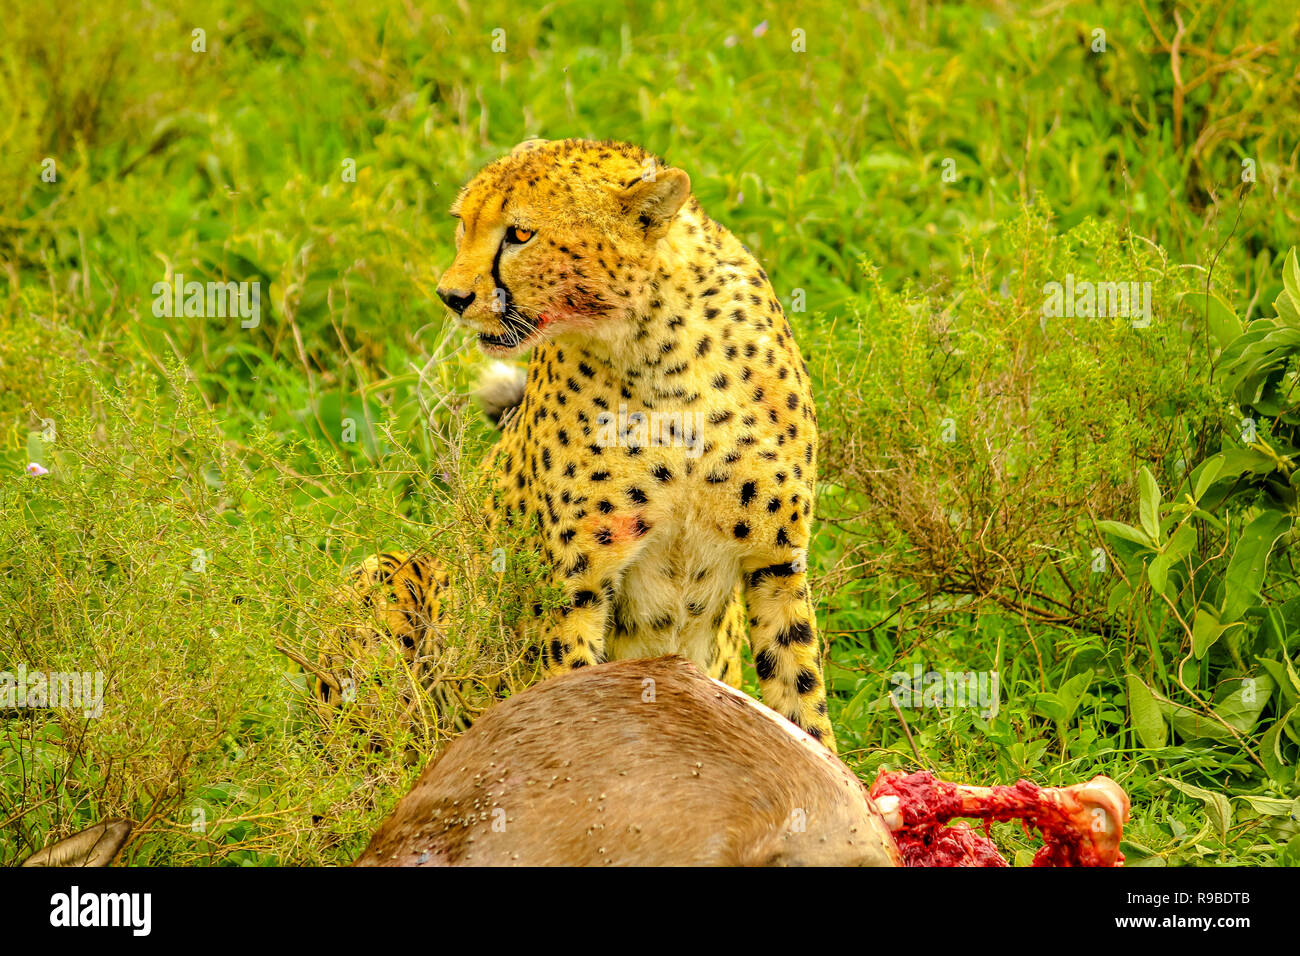 Cheetah male standing with bloody face after eating at young Gnu or Wildebeest in green grass vegetation. Ndutu Area of Ngorongoro Conservation Area, Tanzania, Africa. Stock Photo